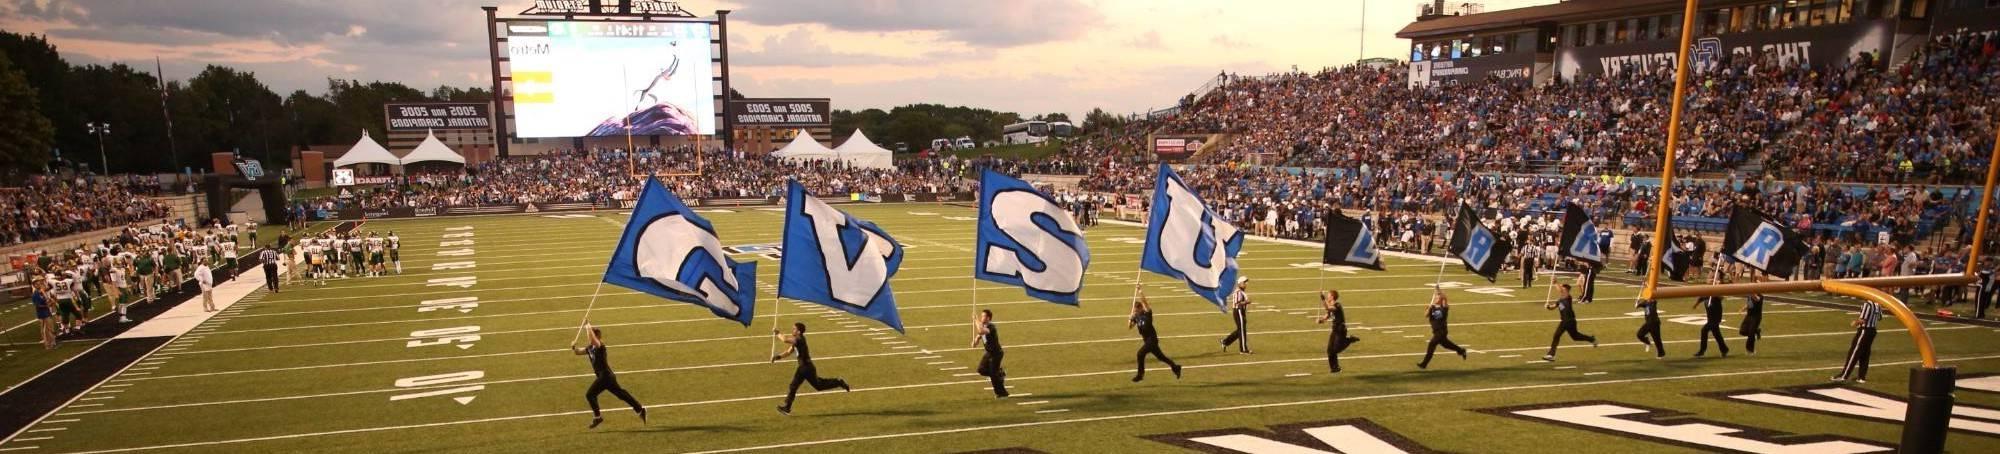 GVSU marching band running out on football field